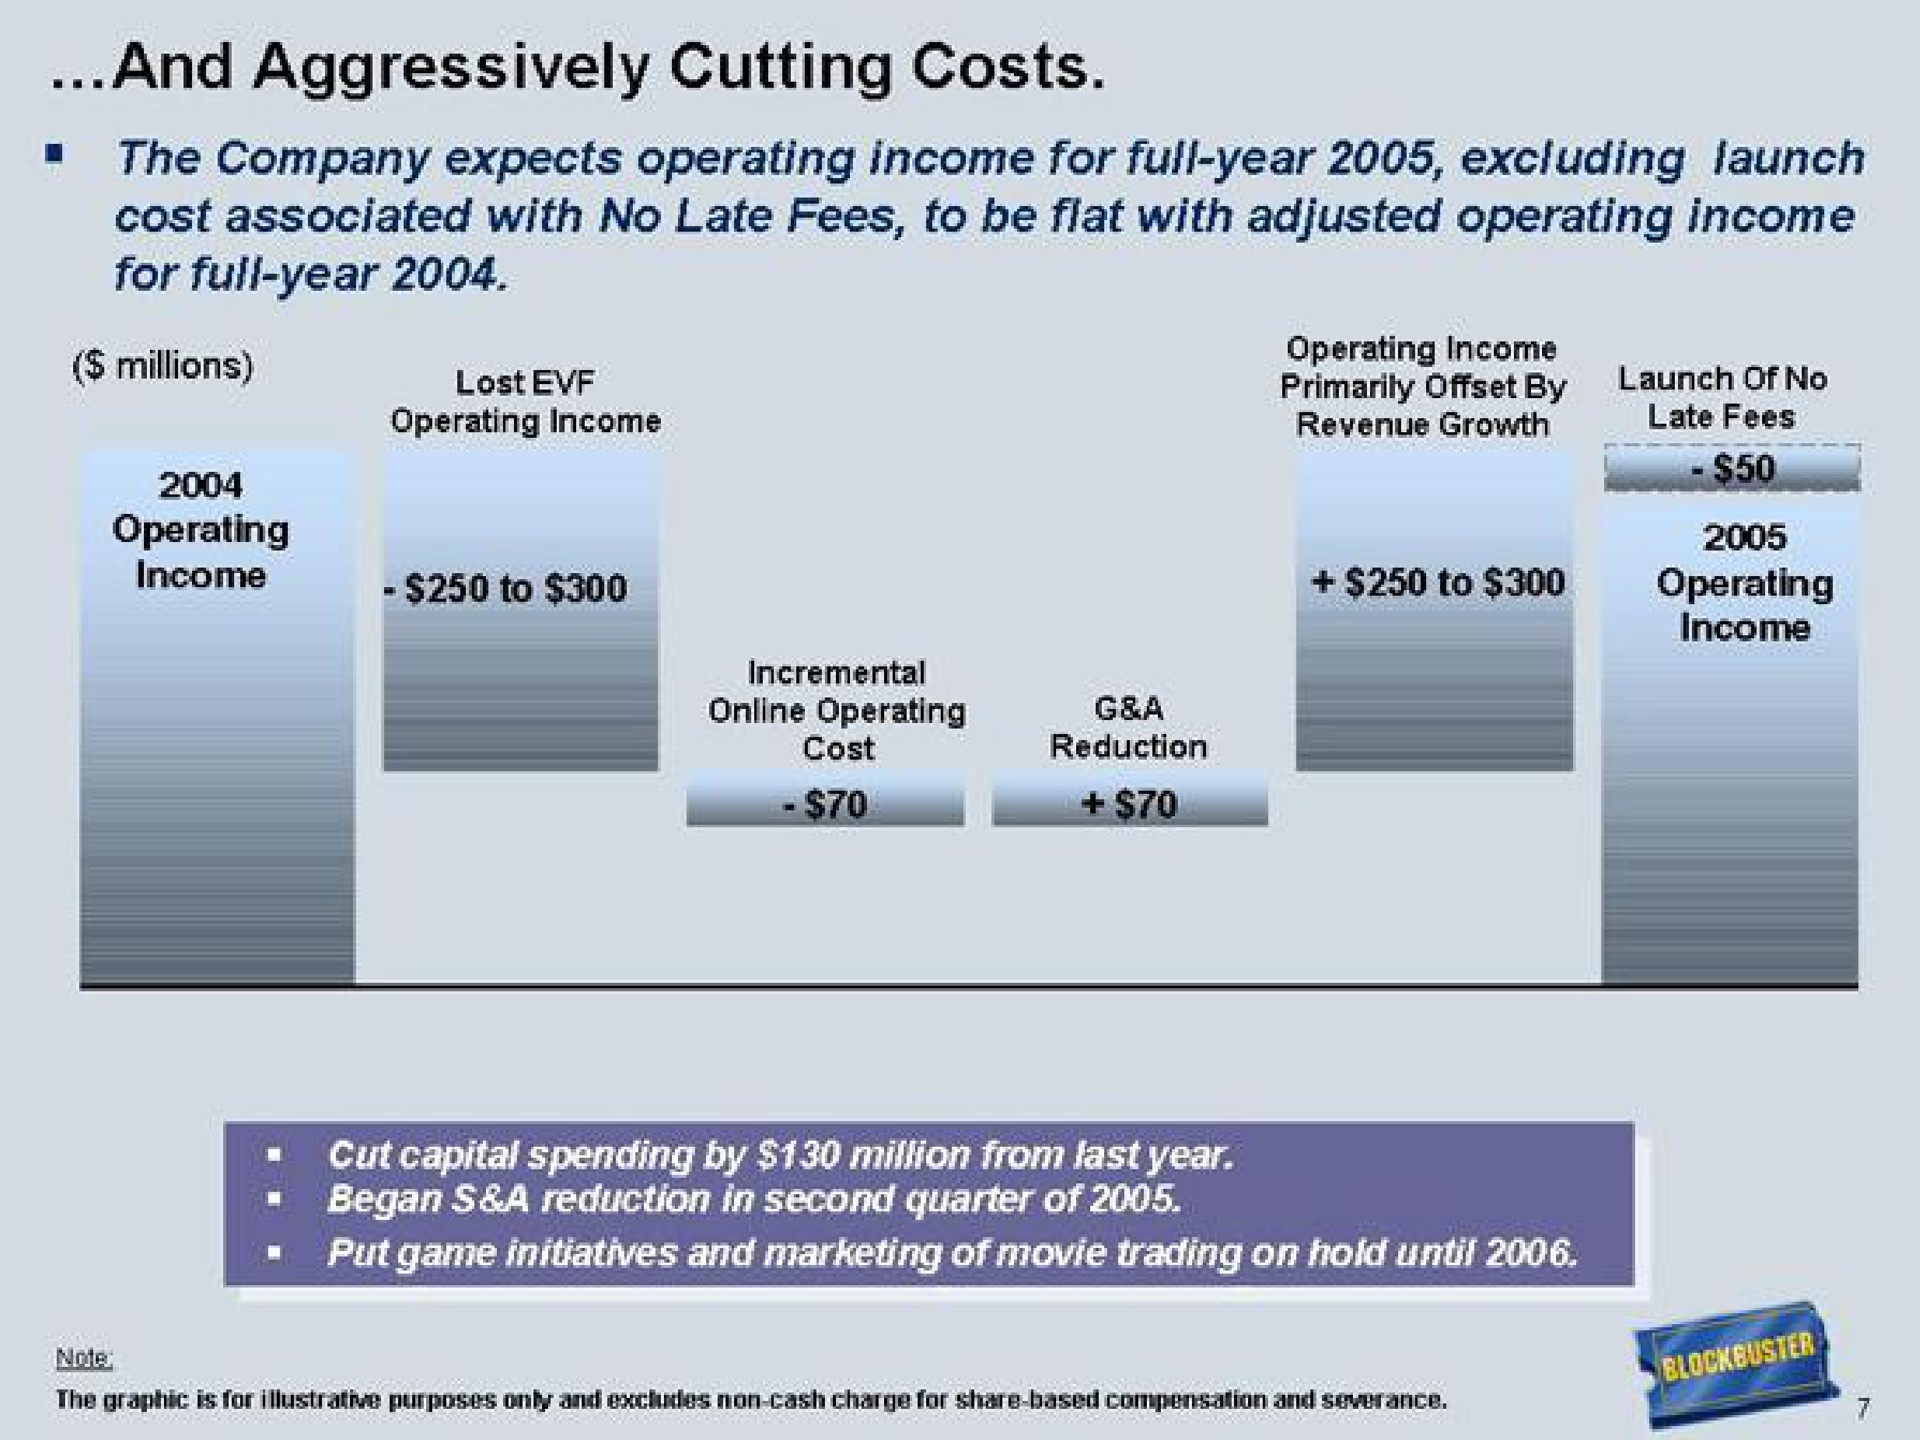 and aggressively cutting costs millions lost primarily launch of no | Blockbuster Video